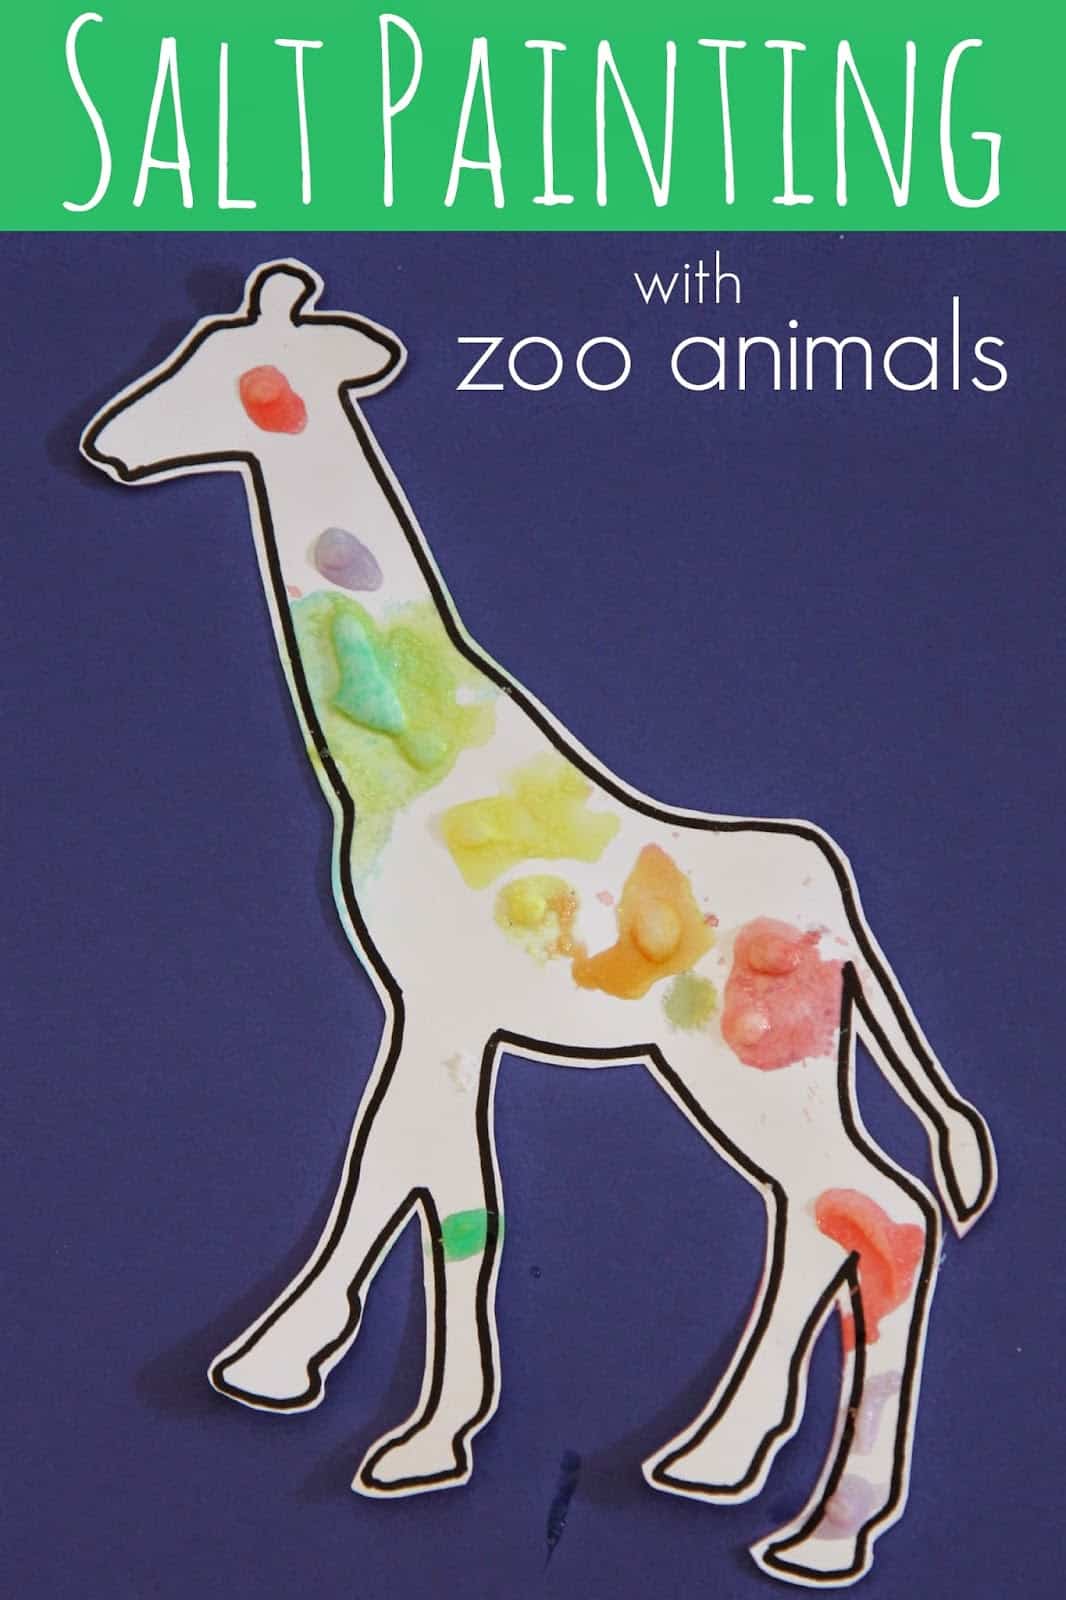 Zoo Animal Salt Painting for Kids - Toddler Approved